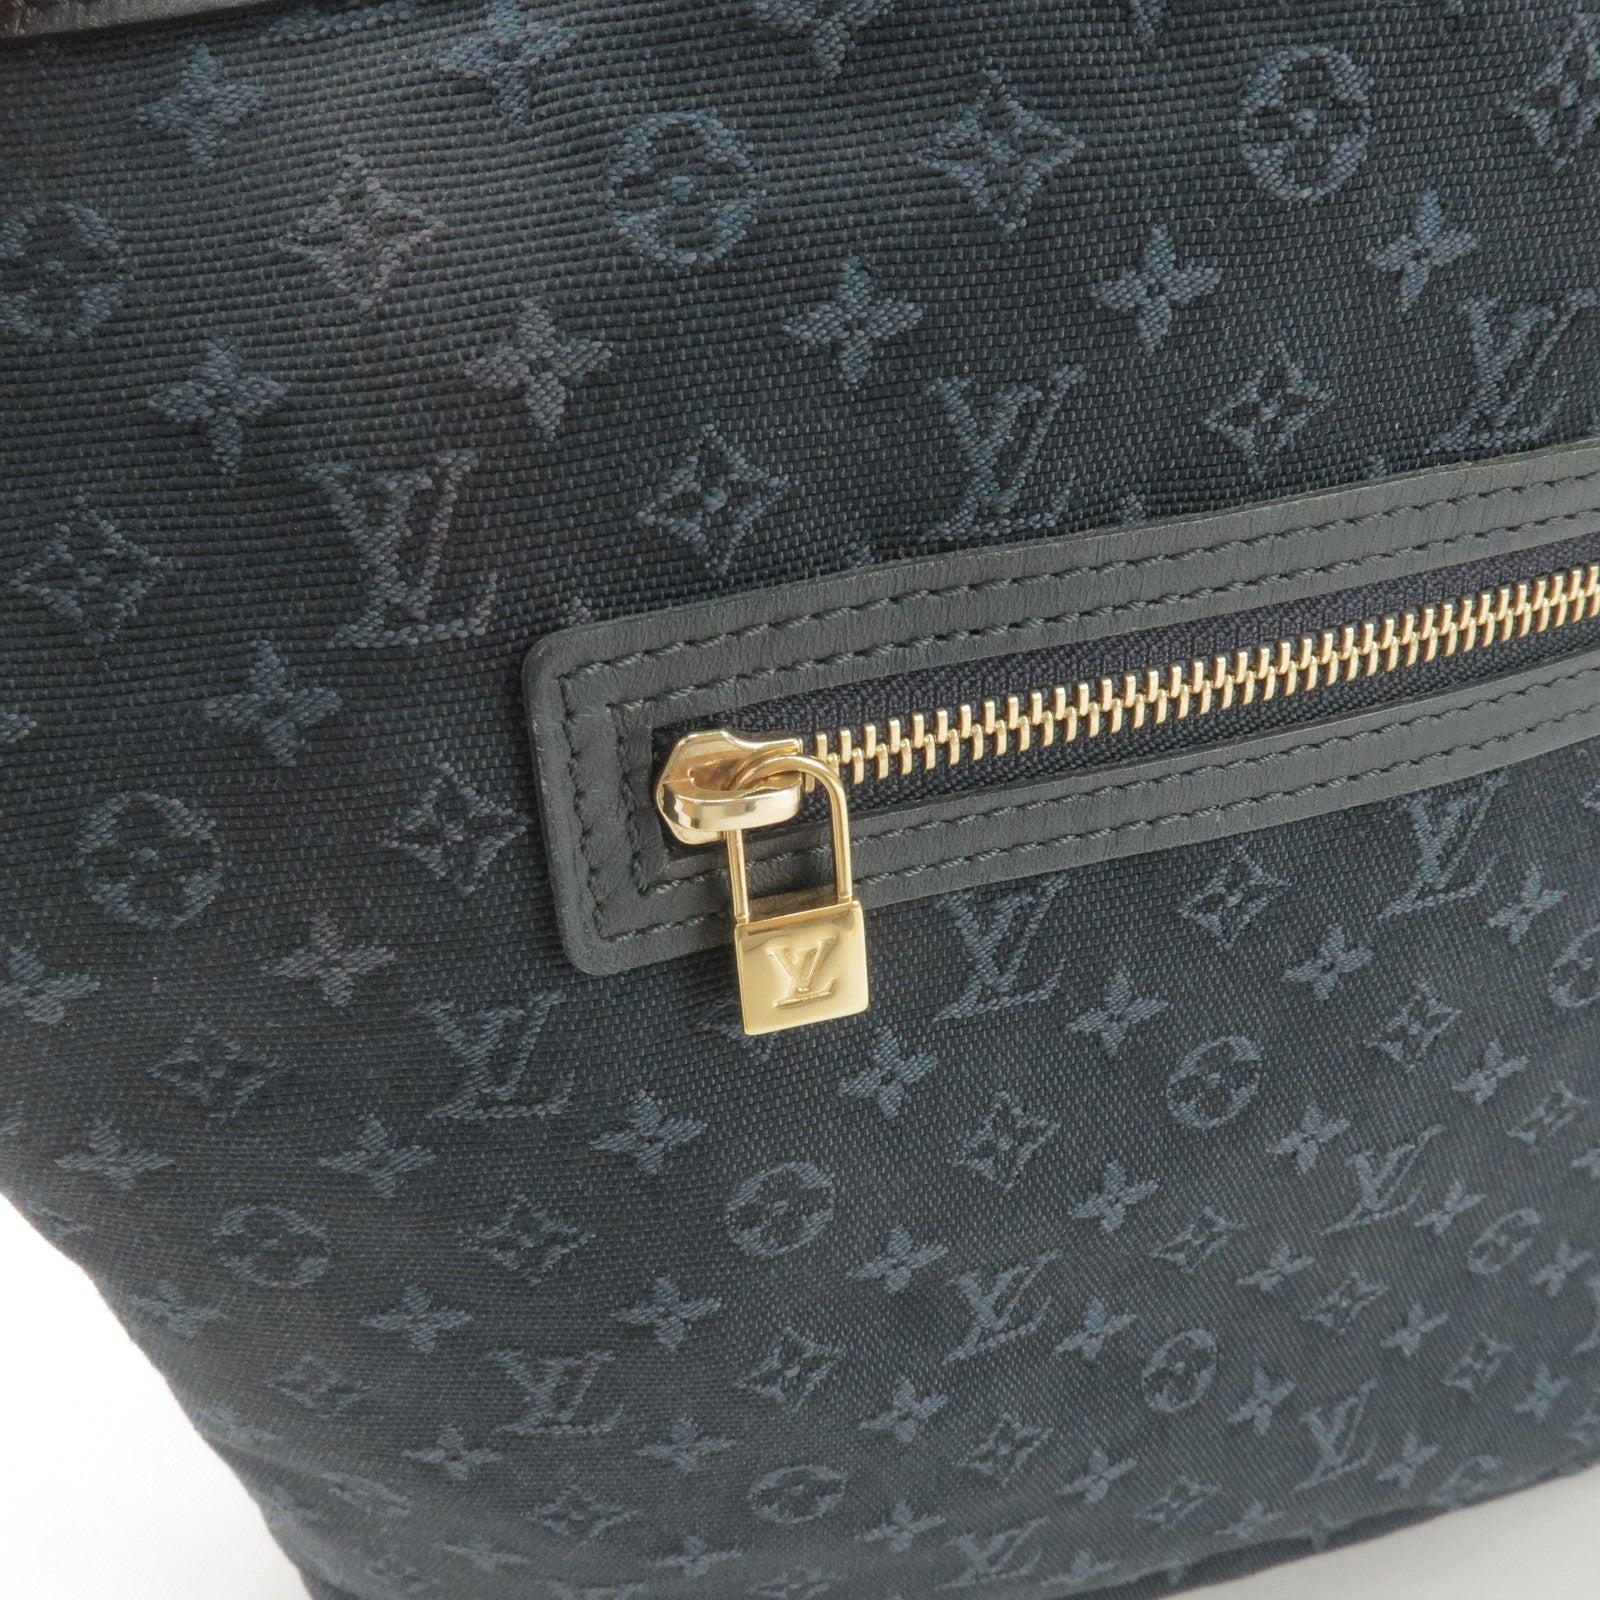 Louis Vuitton // Odyssey Review & What Fits 